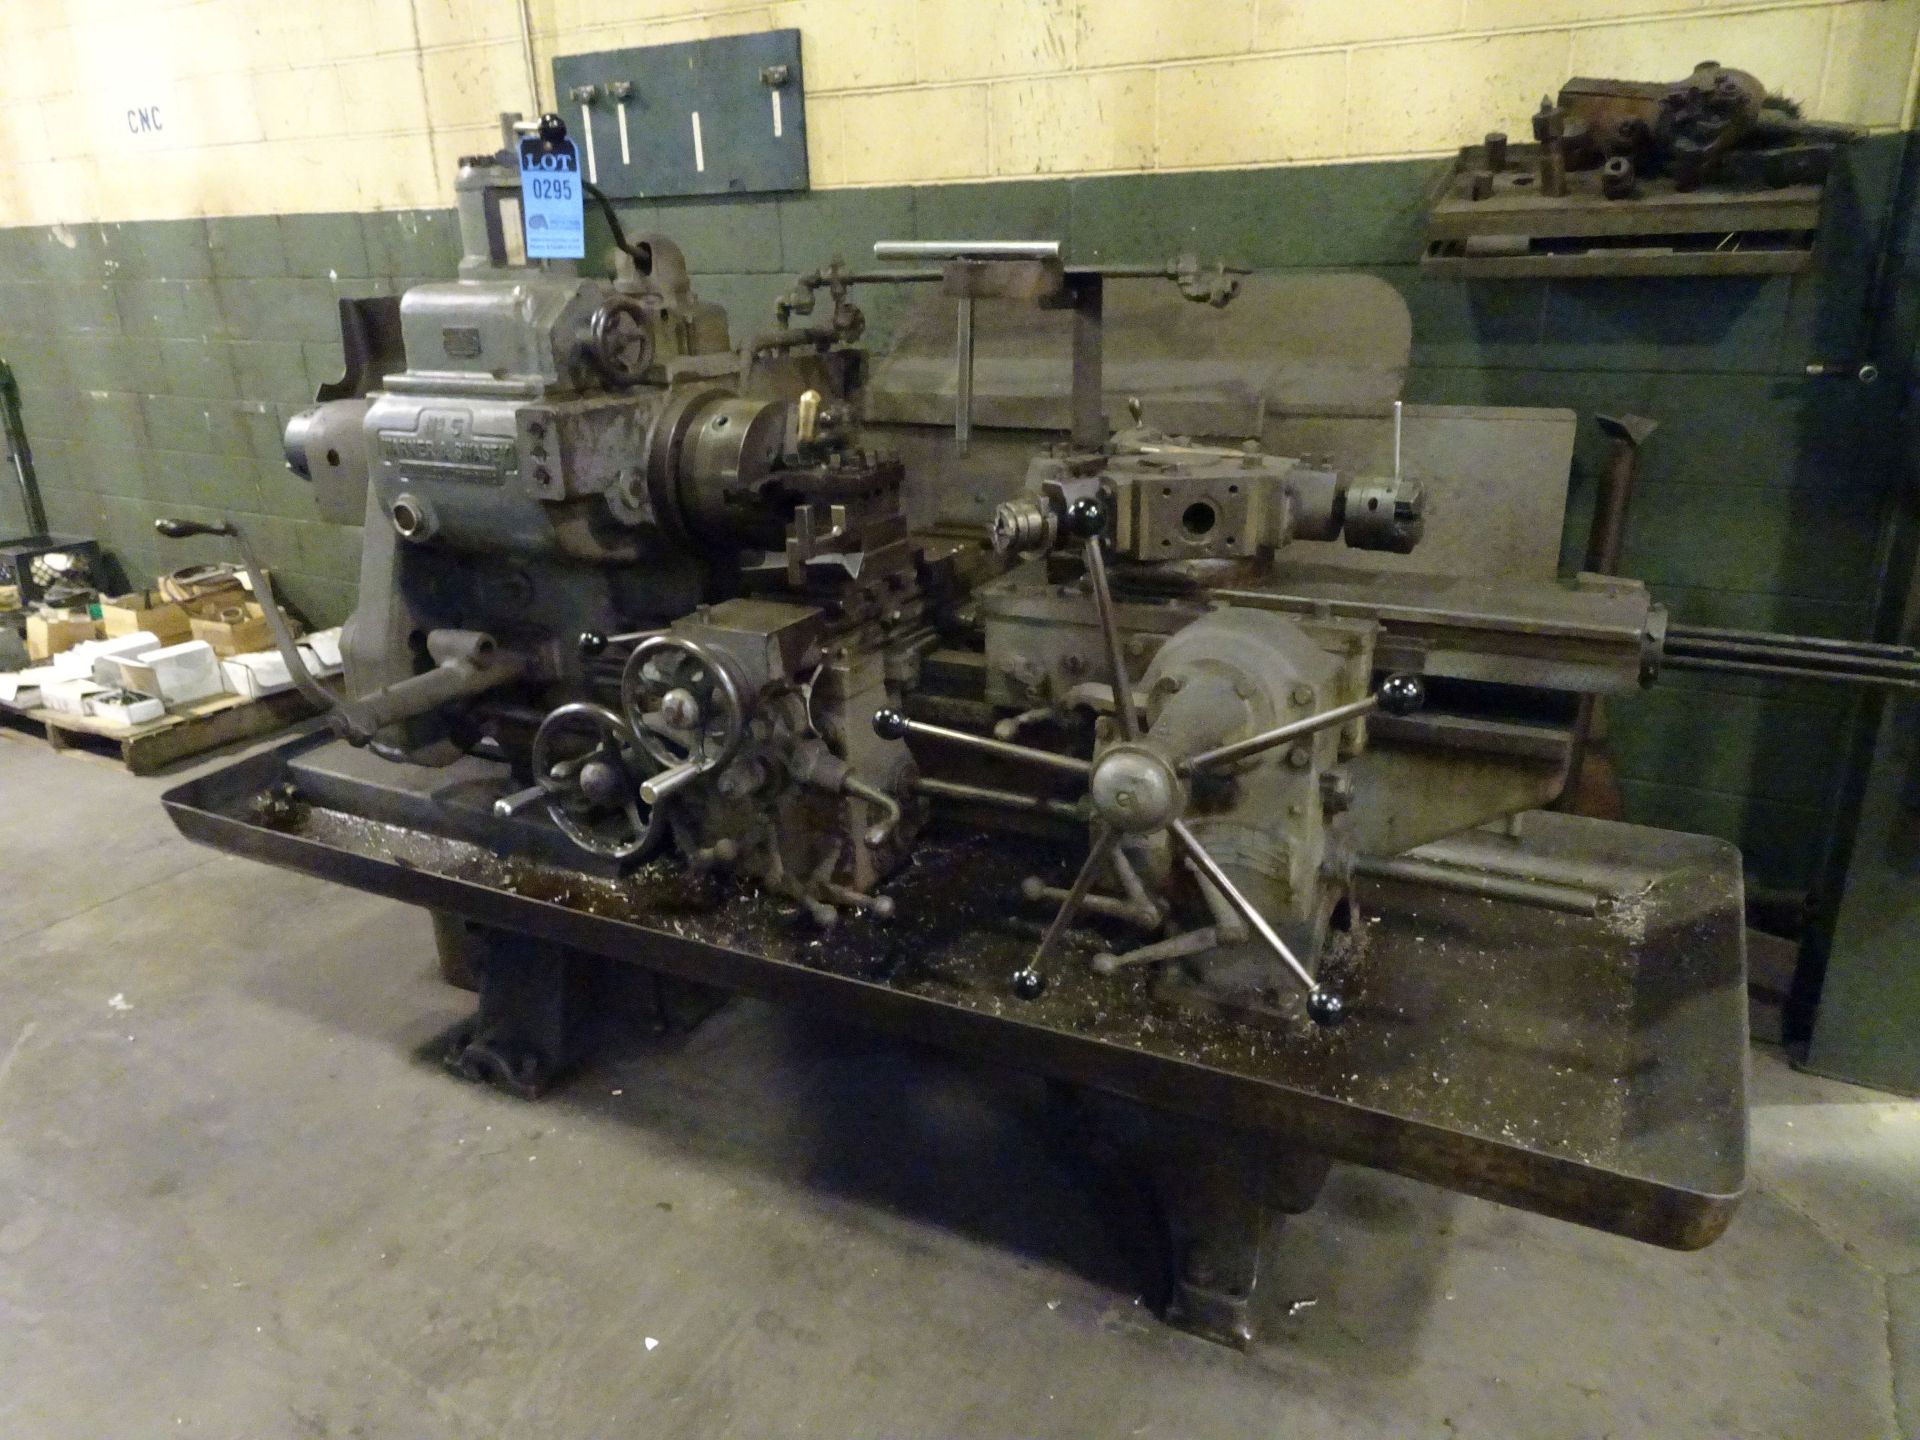 WARNER AND SWASEY NO. 5 TURRET LATHE; S/N 571847, 6-POSITION TURRET, 10" 3-JAW CHUCK, 2-3/4" SPINDLE